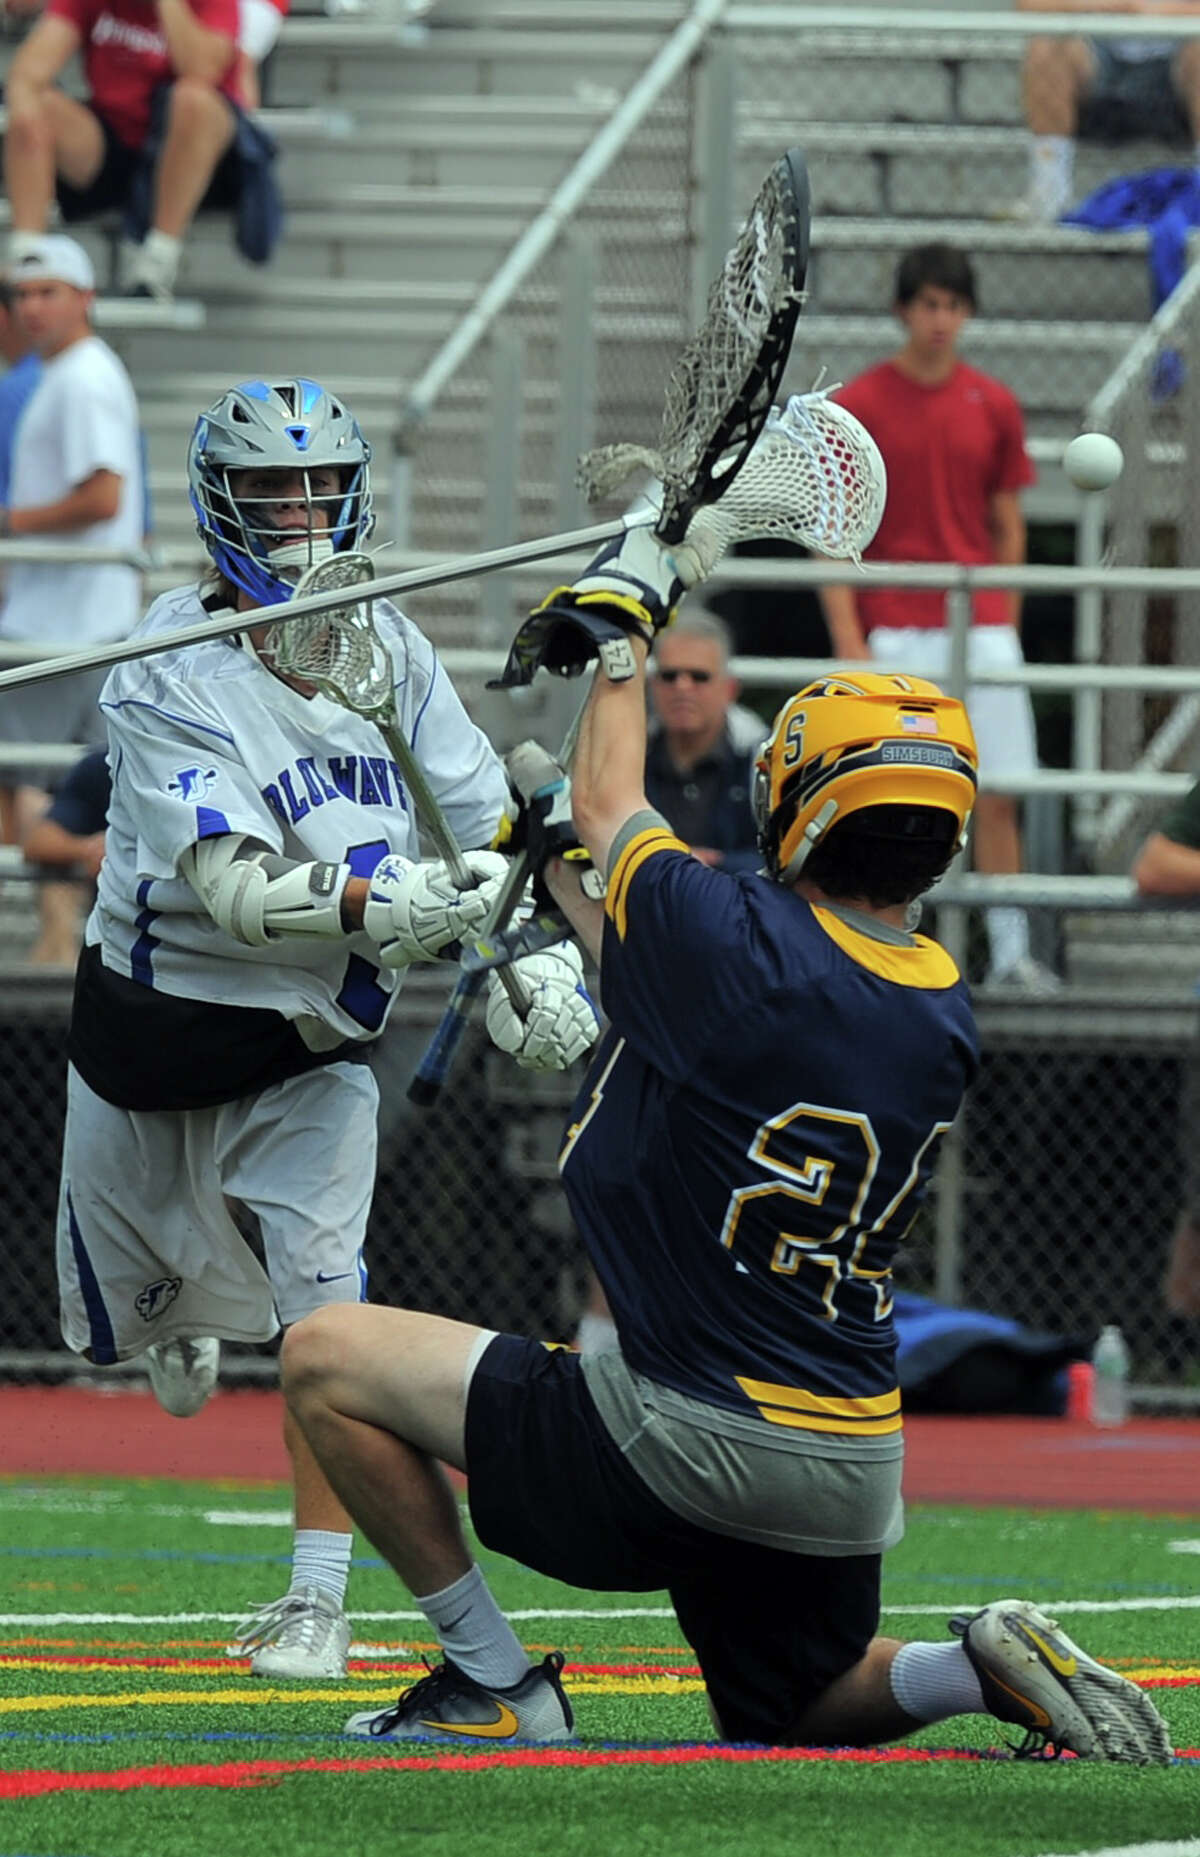 Darien defeated Simsbury 18-3 in a CIAC Class L boys lacrosse championship at Jack Casagrande Field on the campus of Brien McMahon High School in Norwalk on Saturday, June 11, 2016.